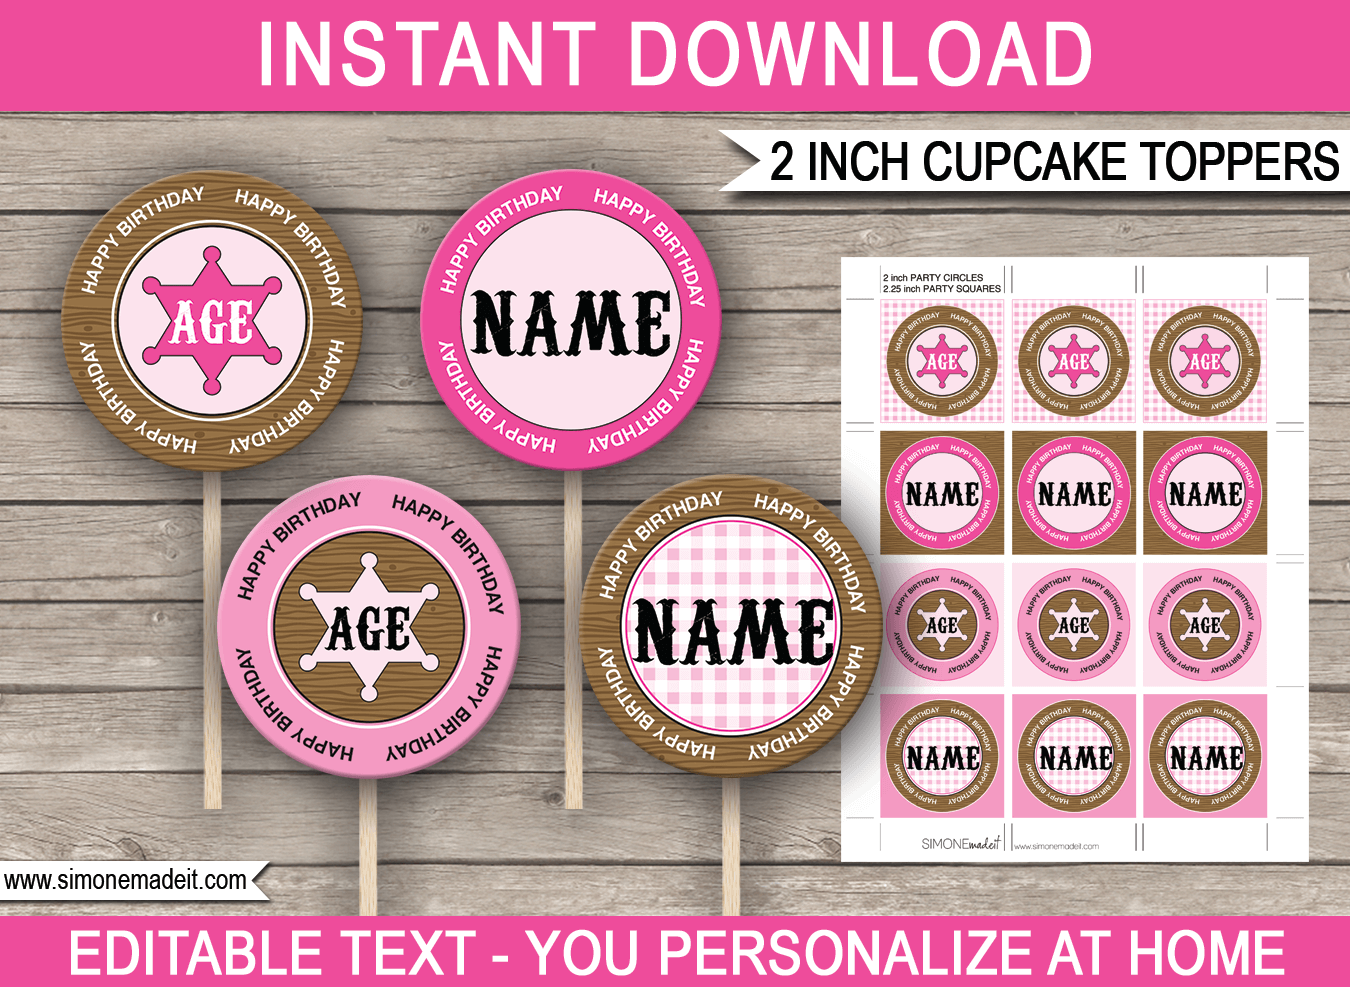 Printable Cowgirl Cupcake Toppers | 2 inch | Gift Tags | DIY Editable & Printable Template | INSTANT DOWNLOAD via simonemadeit.com